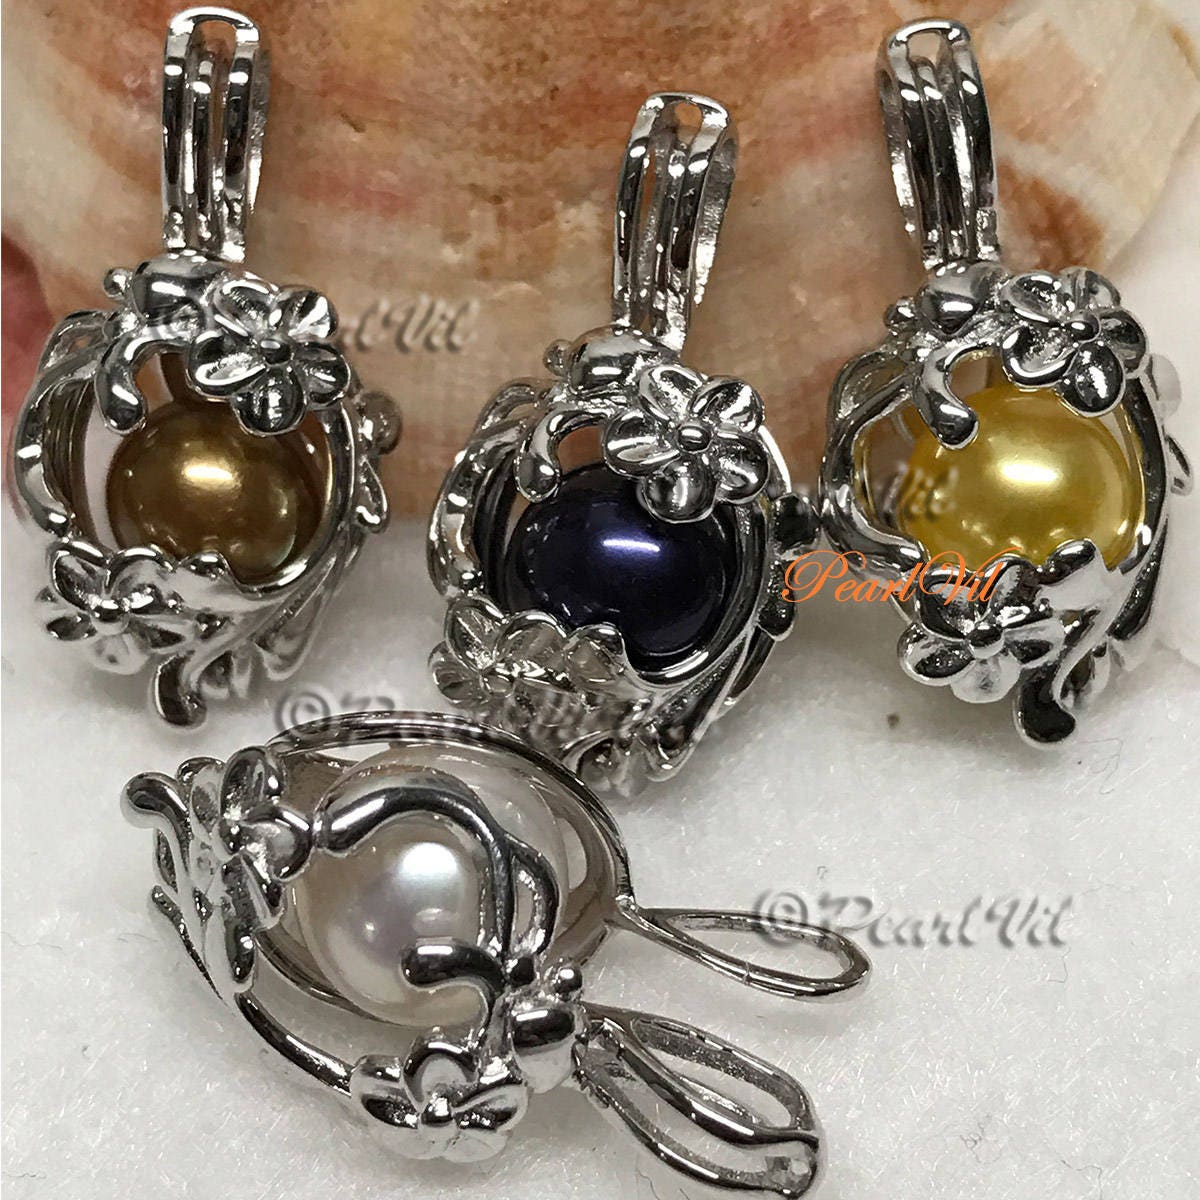 Pearl Cage Necklace-20 Chain/Choice of Pendant W/ Rice Pearl Oyster Fit  6-9mm